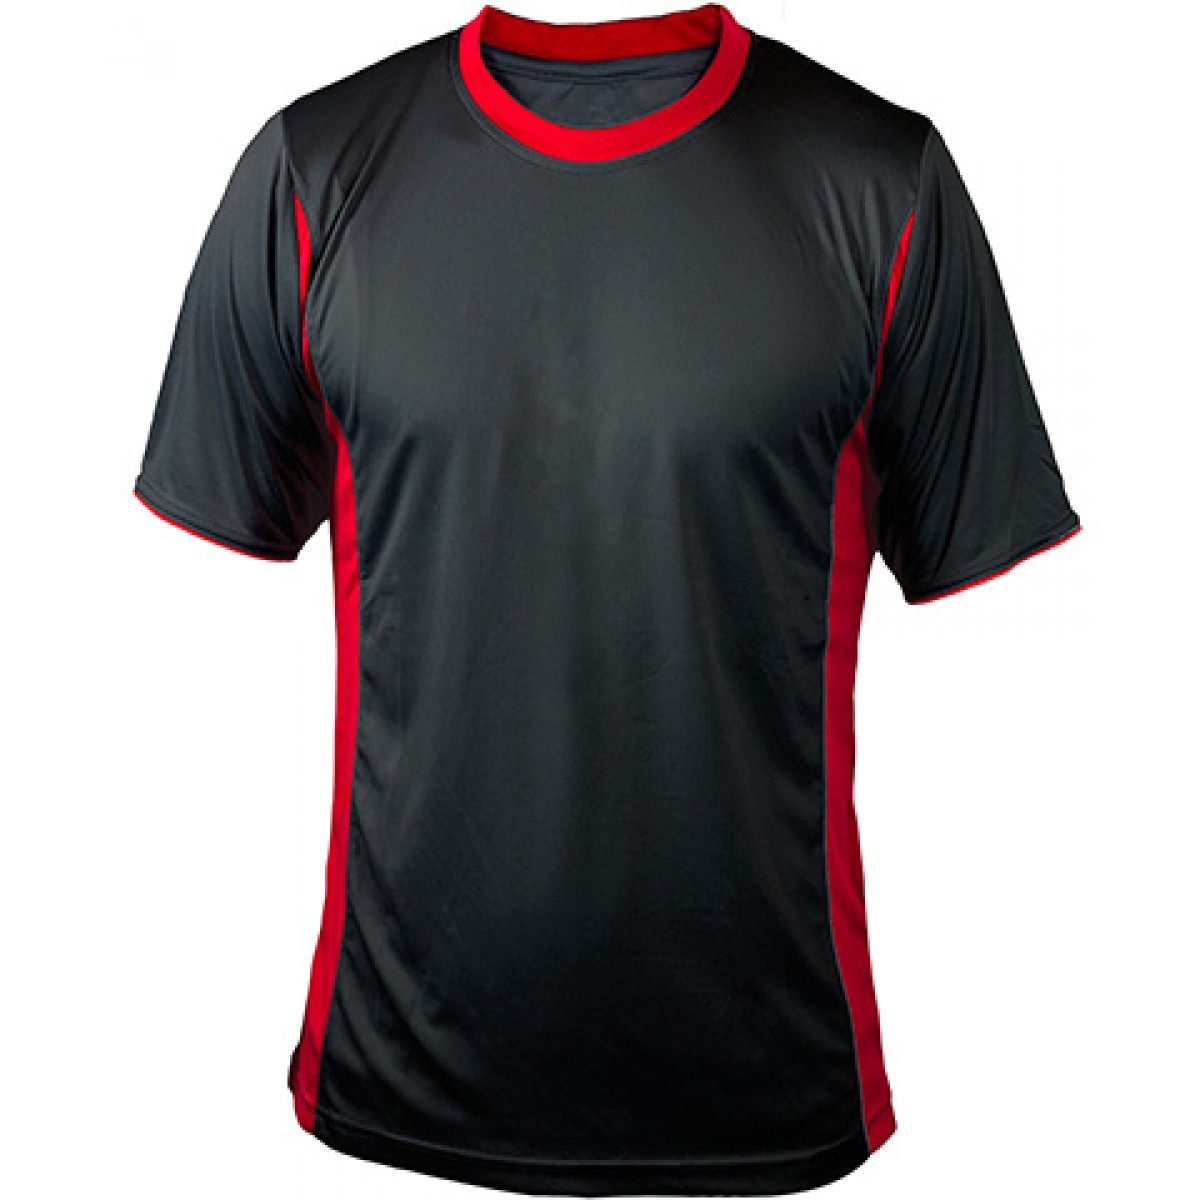 Black Short Sleeves Performance With Red Side Insert